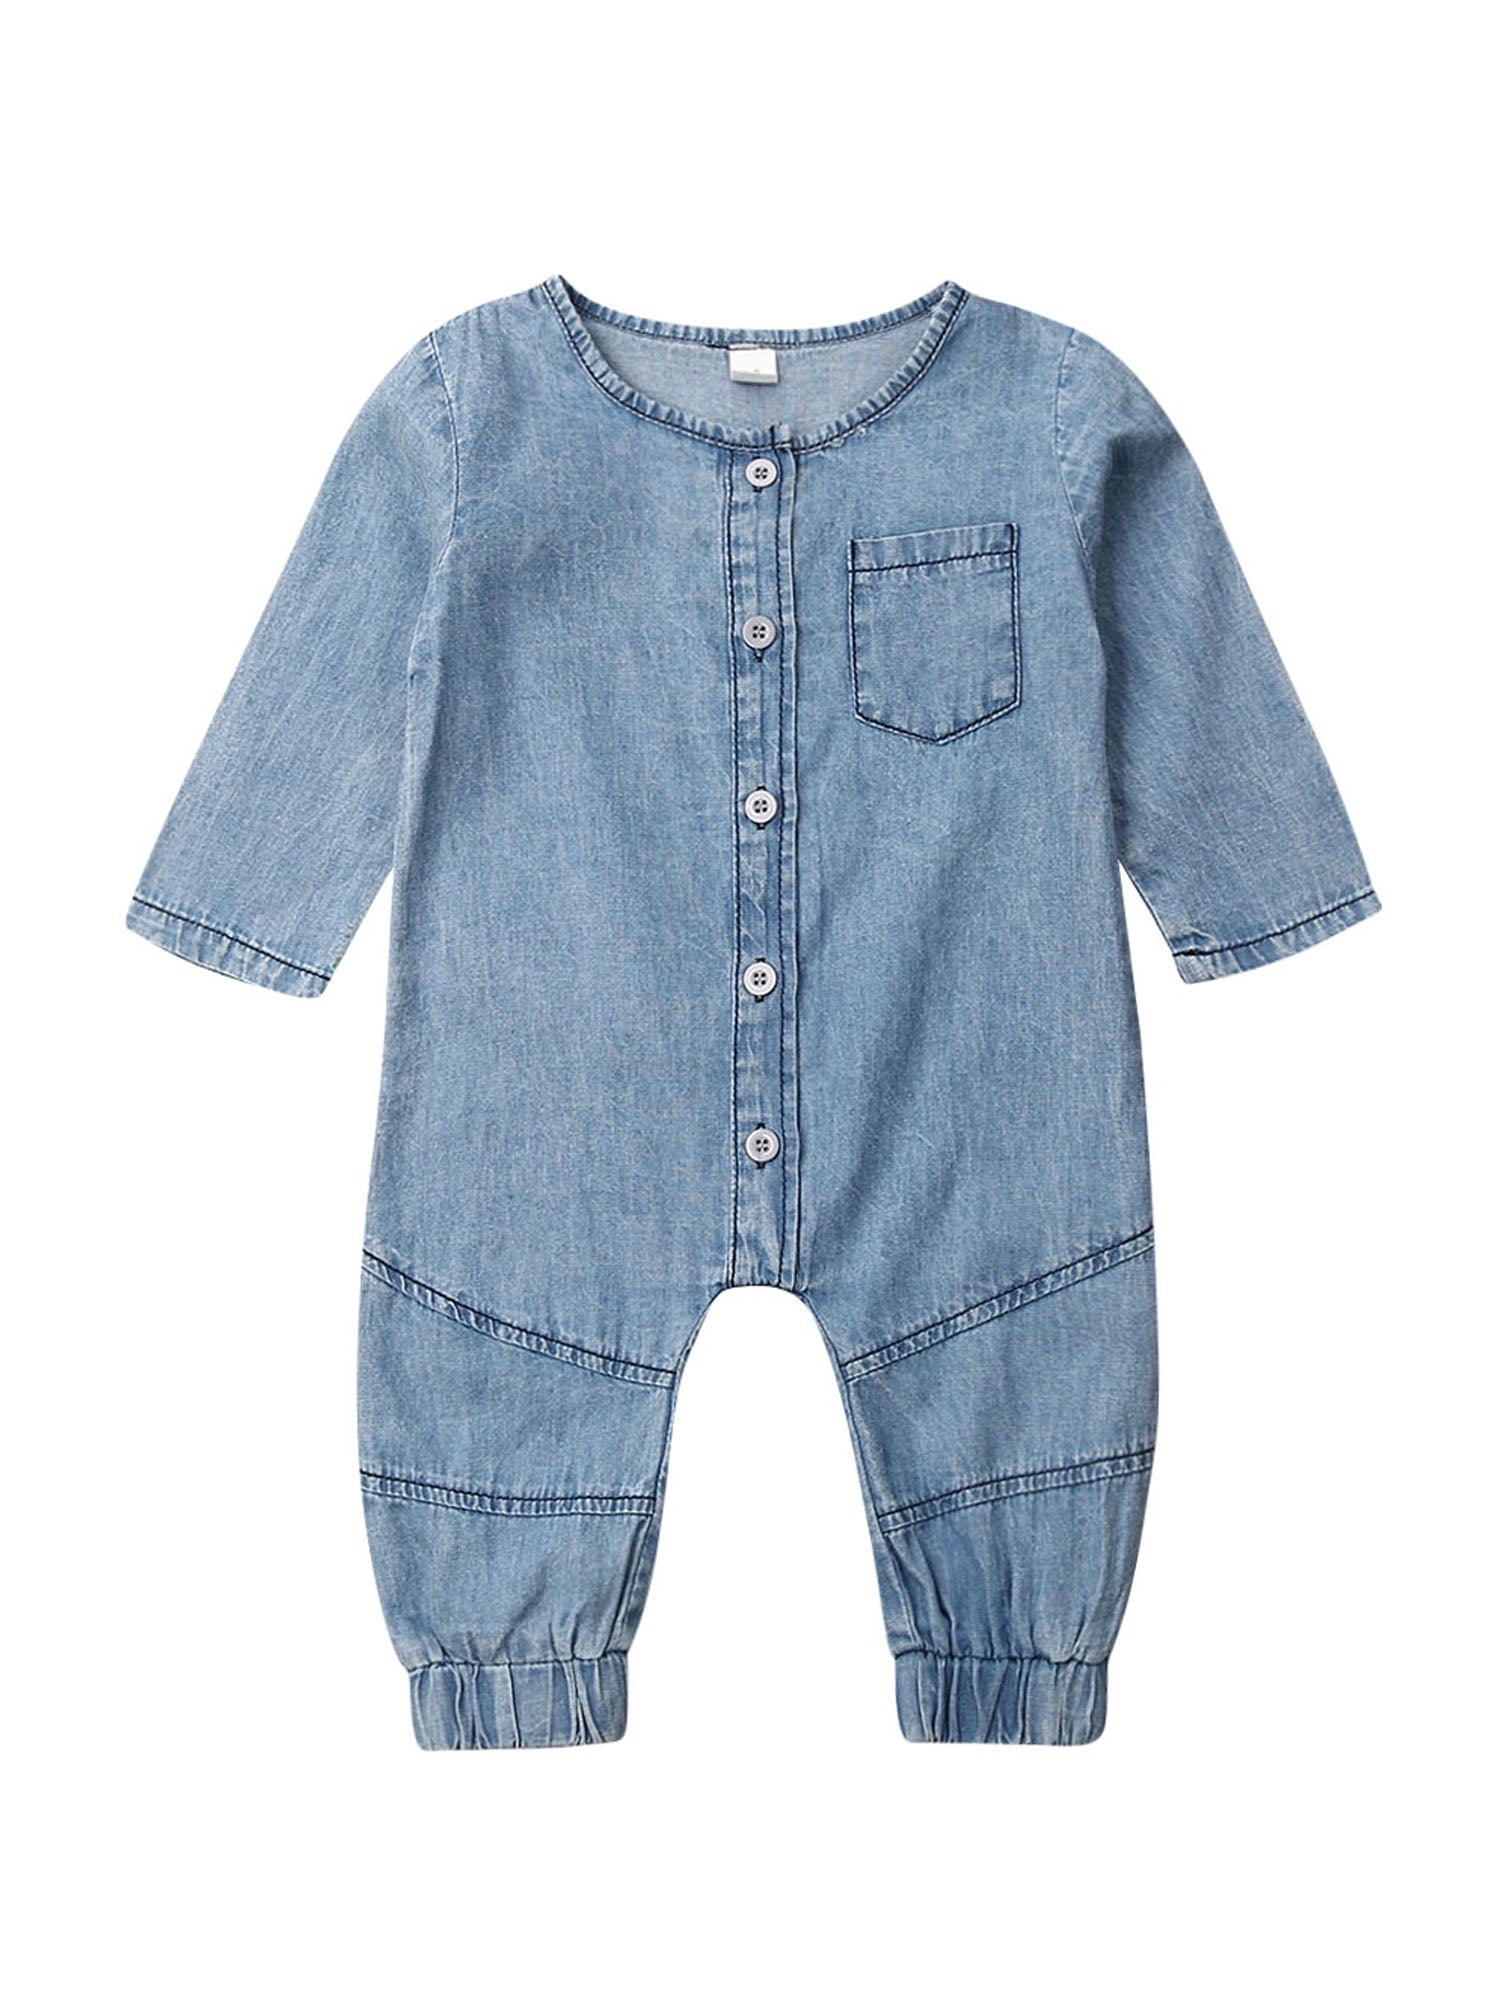 jeans romper for baby boy